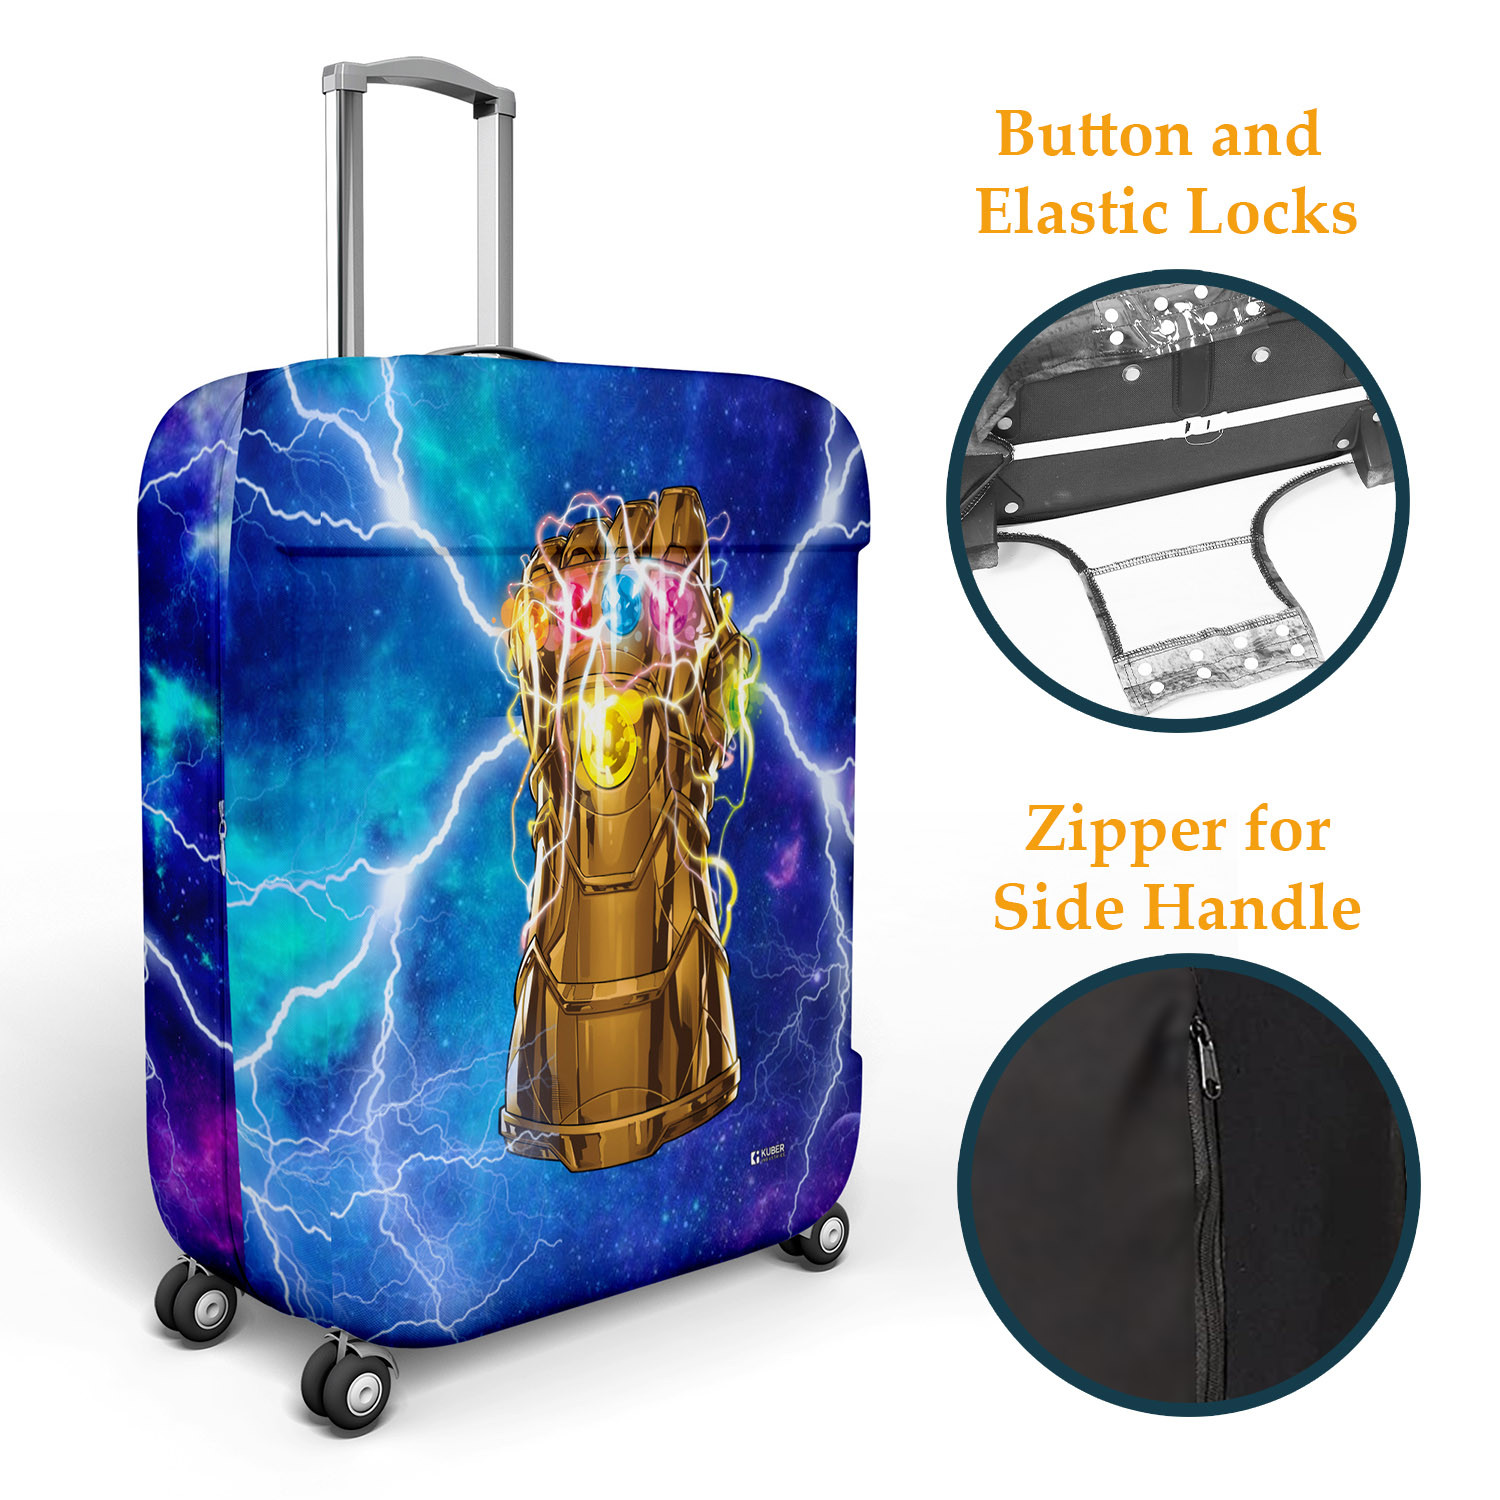 Kuber Industries Marvel The Infinity Gauntlet Luggage Cover | Polyester Travel Suitcase Cover | Washable | Stretchable Suitcase Cover | 22-26 Inch-Medium | 26-30 Inch-Large | Pack of 2 | Sky Blue